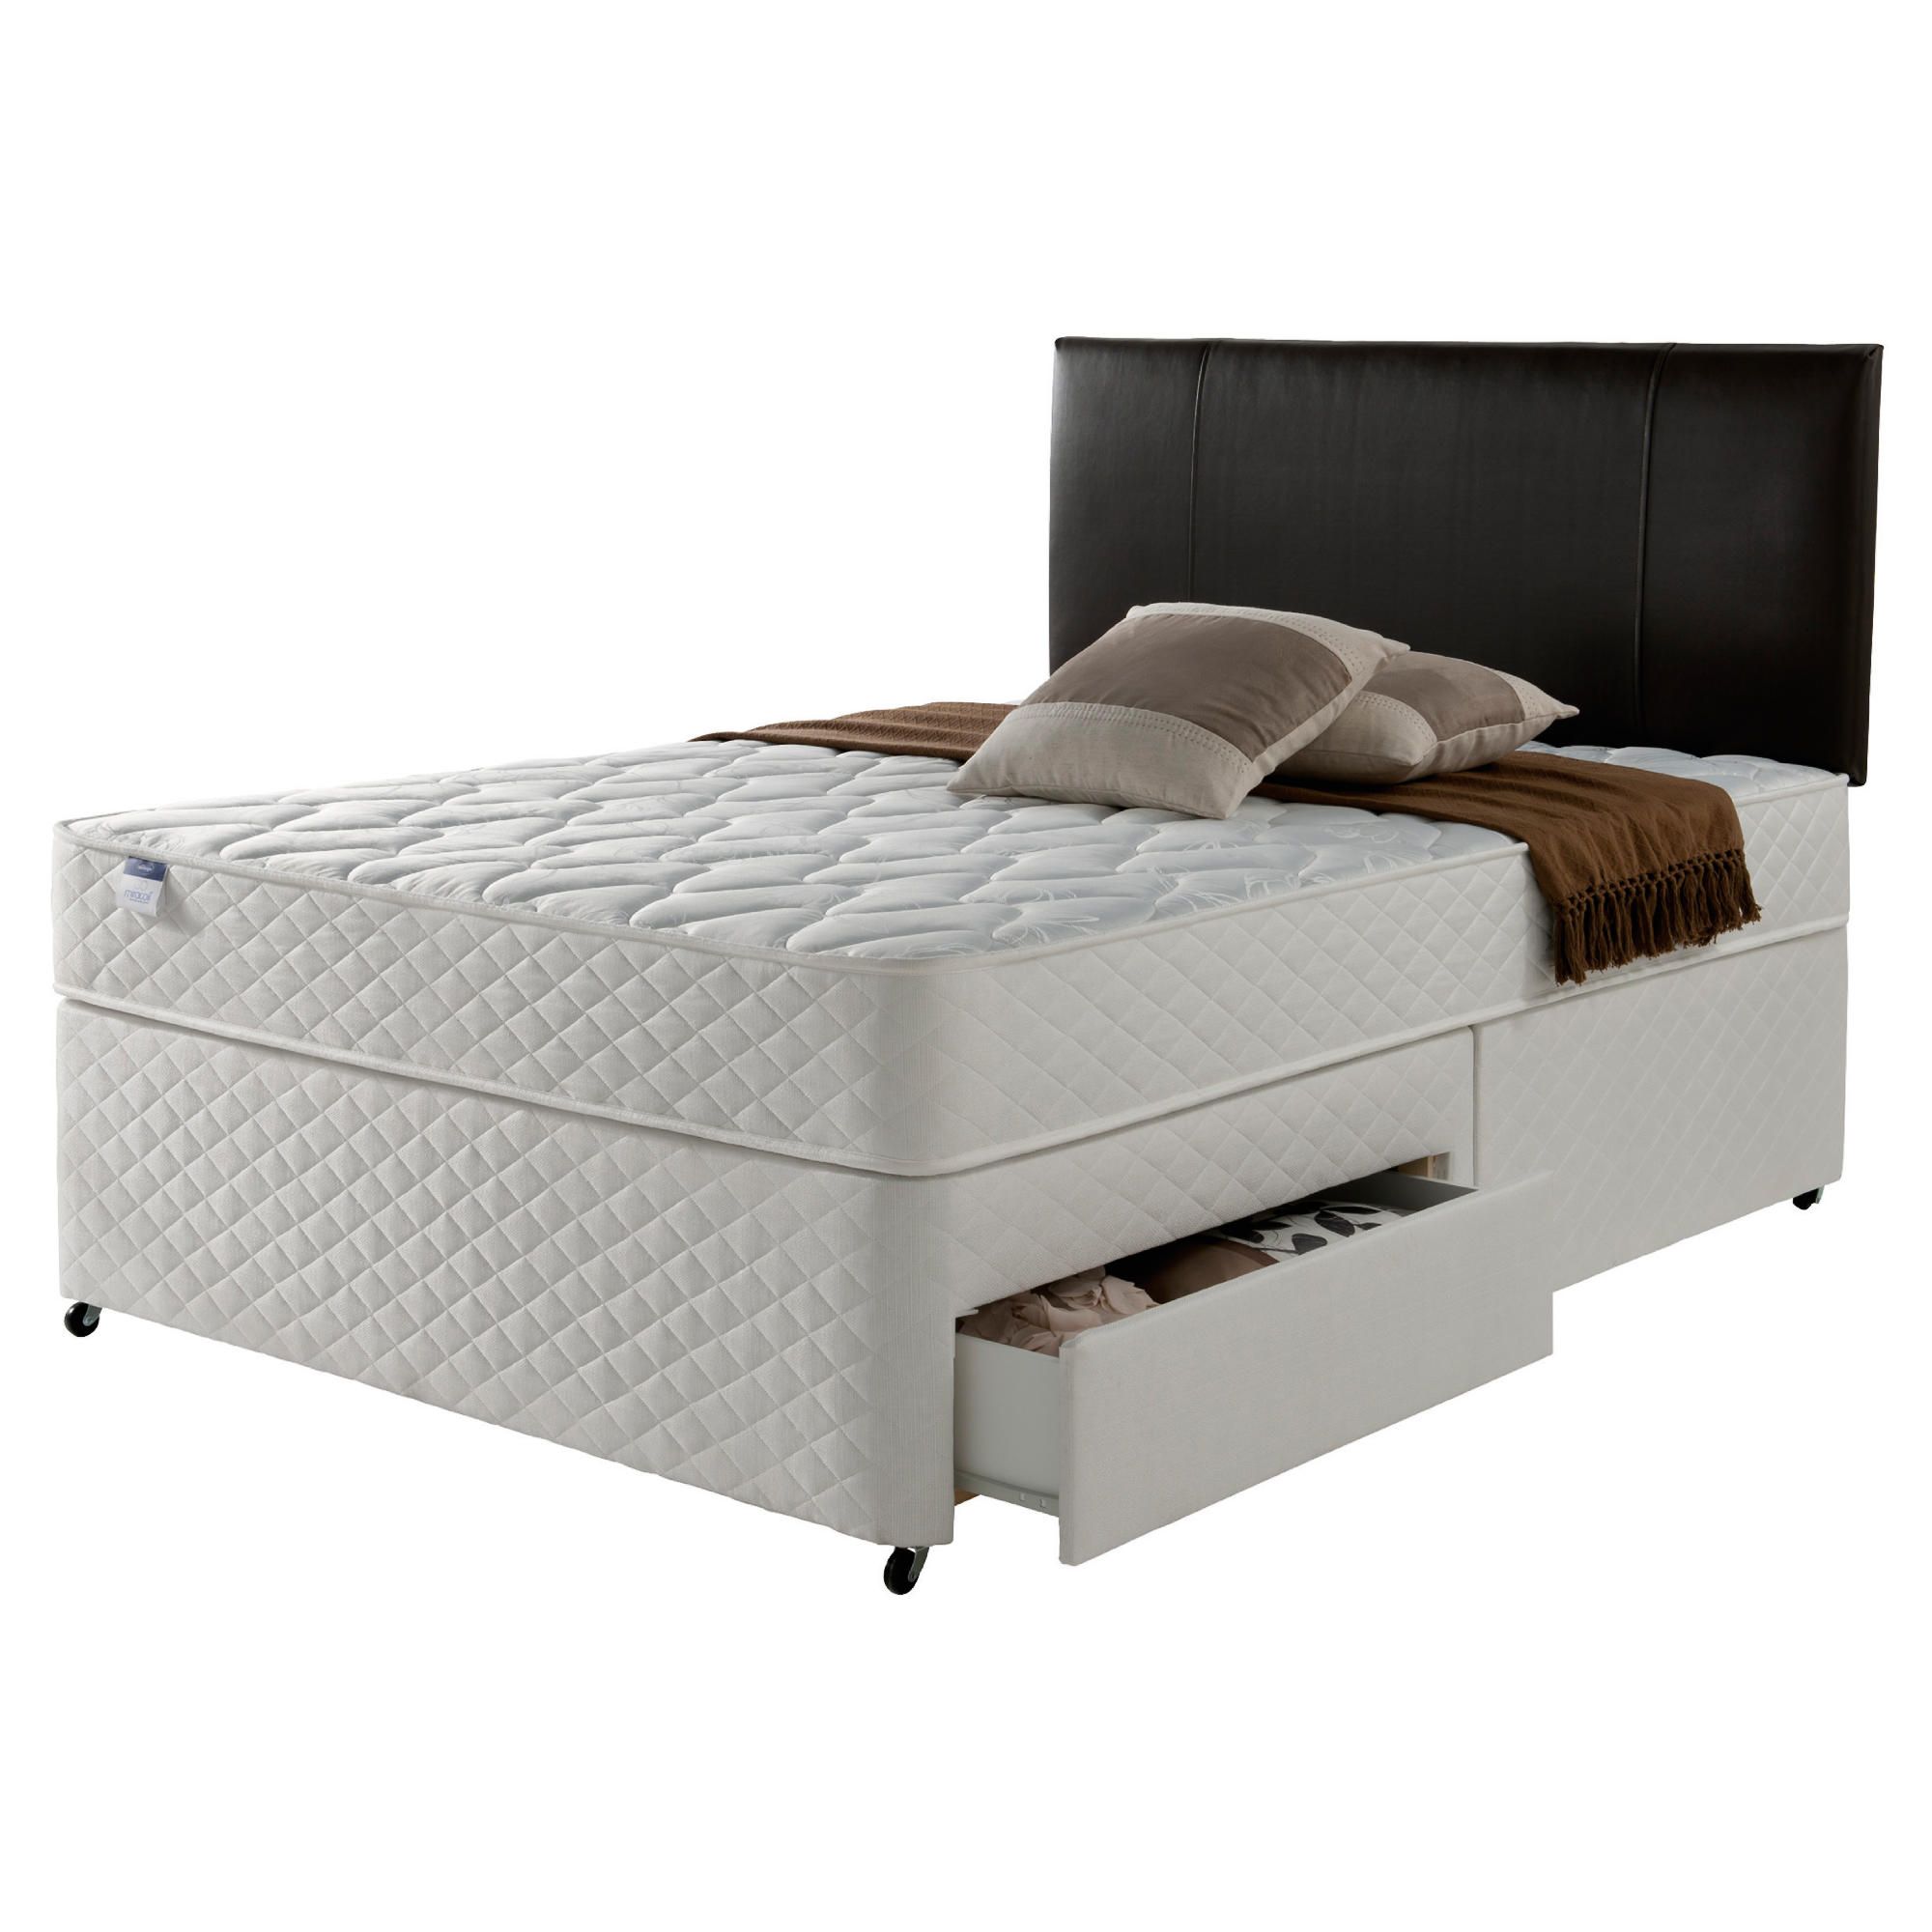 Silentnight Miracoil Comfort Micro Quilt 4 Drawer Divan, Small Double at Tesco Direct